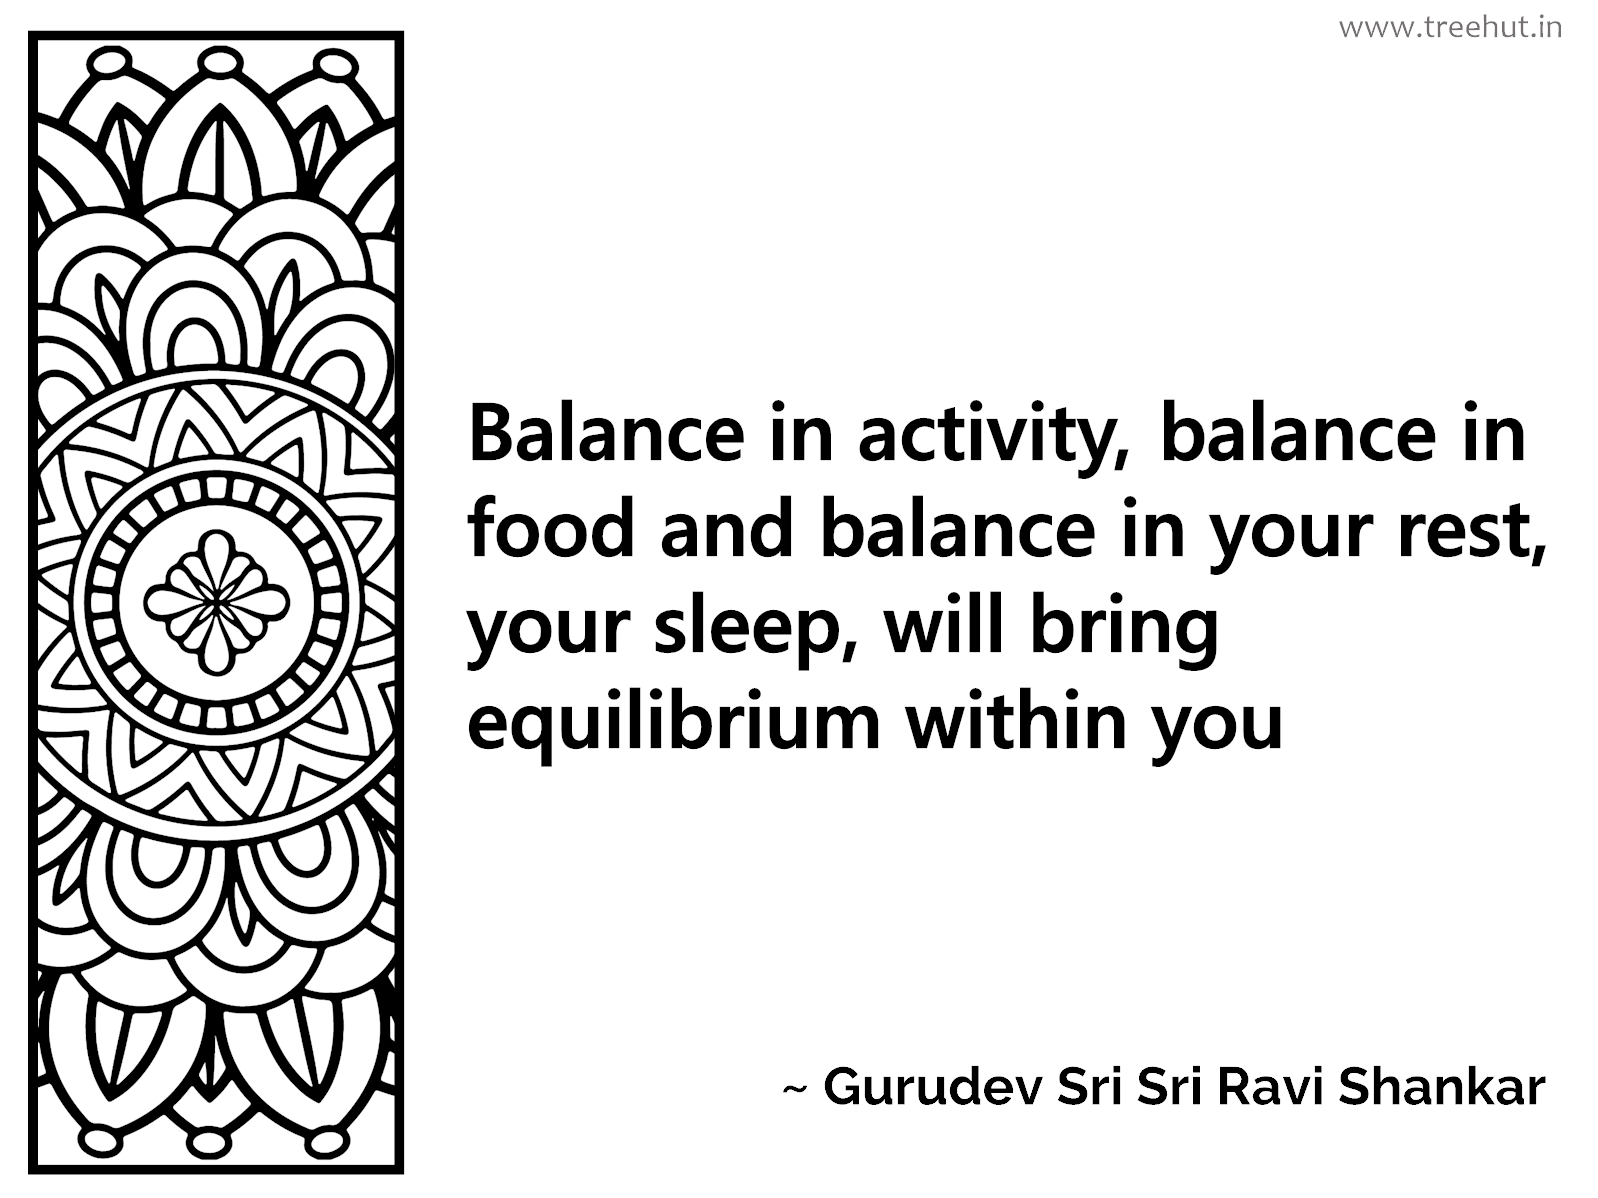 Balance in activity, balance in food and balance in your rest, your sleep, will bring equilibrium within you Inspirational Quote by Gurudev Sri Sri Ravi Shankar, coloring pages